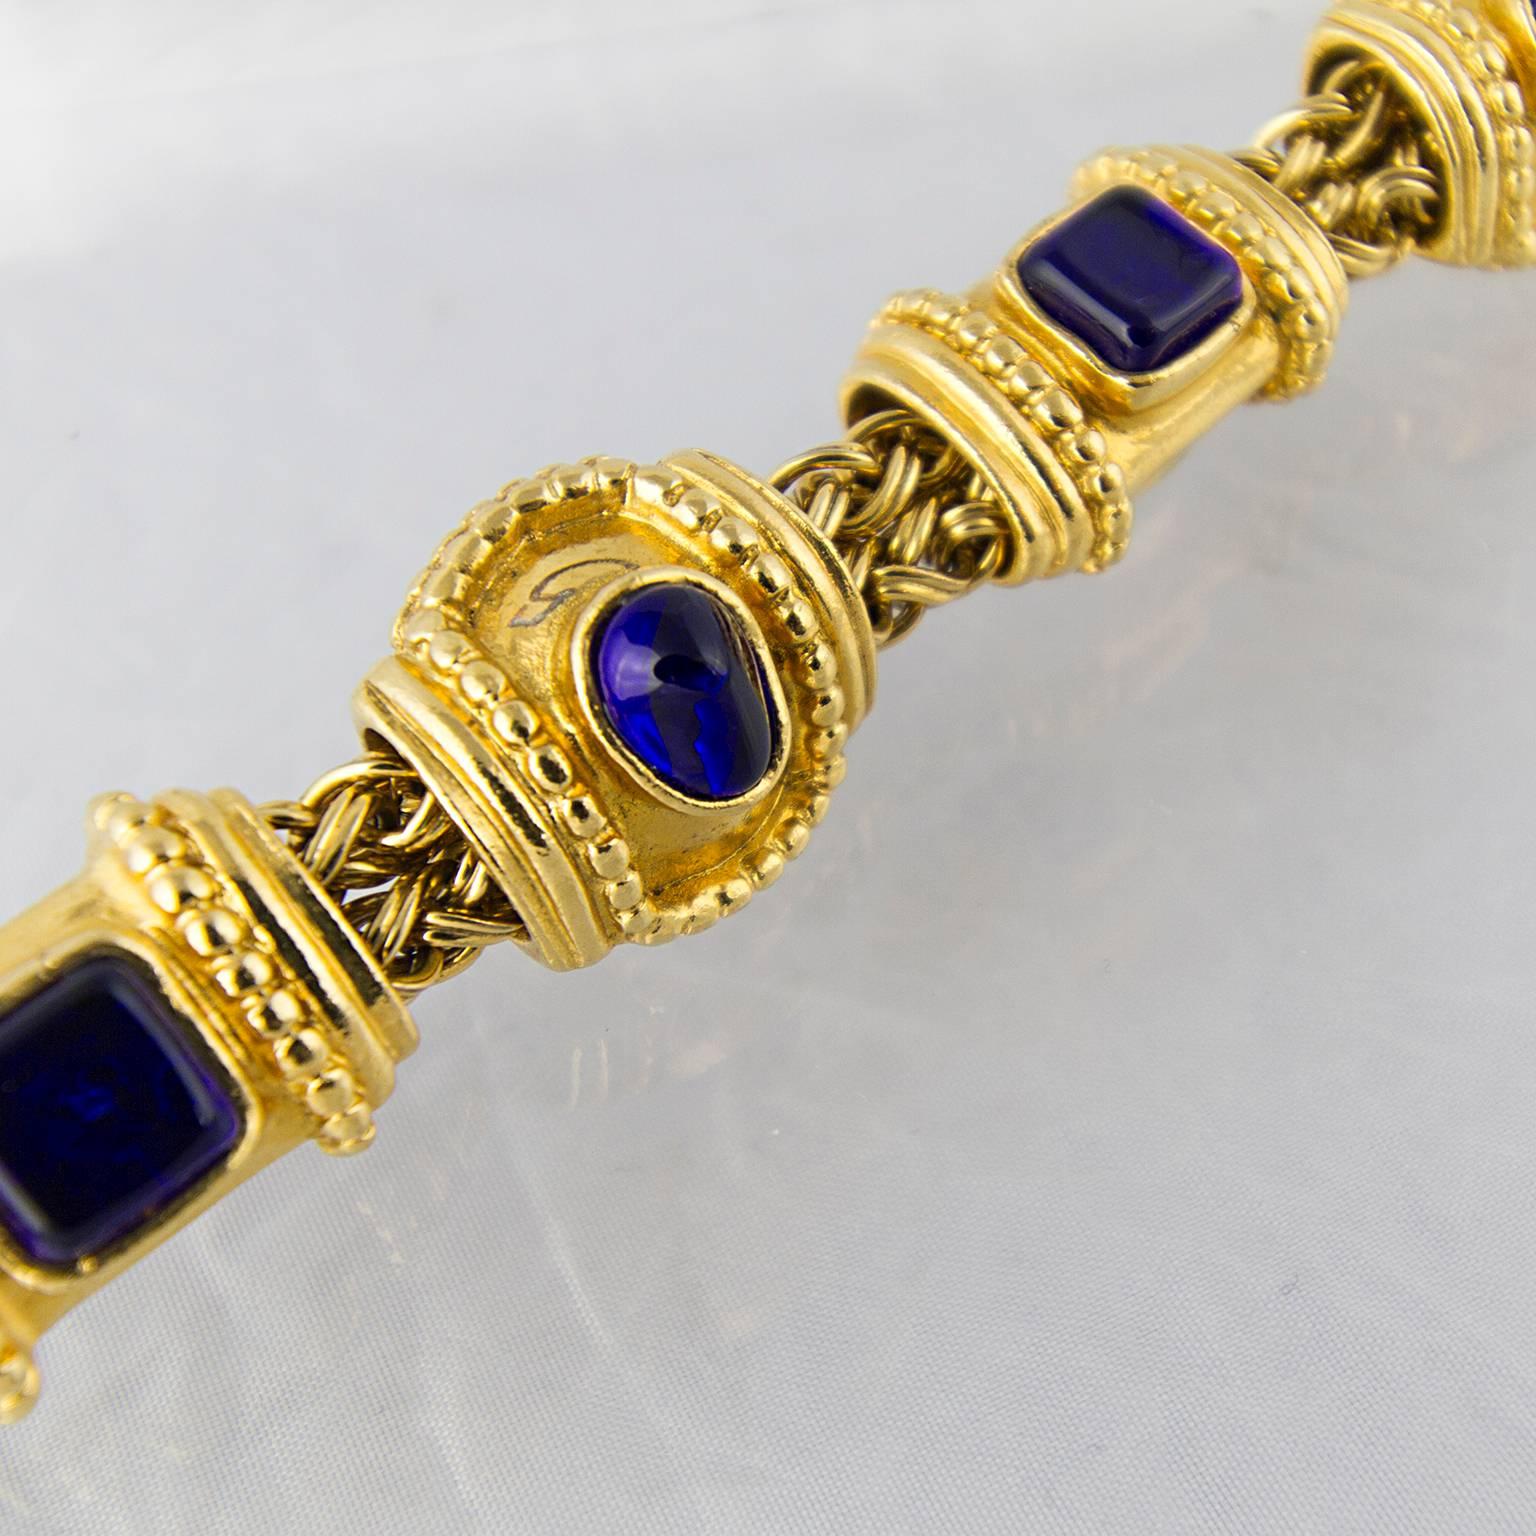 Chanel Etruscan Gold and Cobalt Bracelet In Excellent Condition For Sale In London, GB